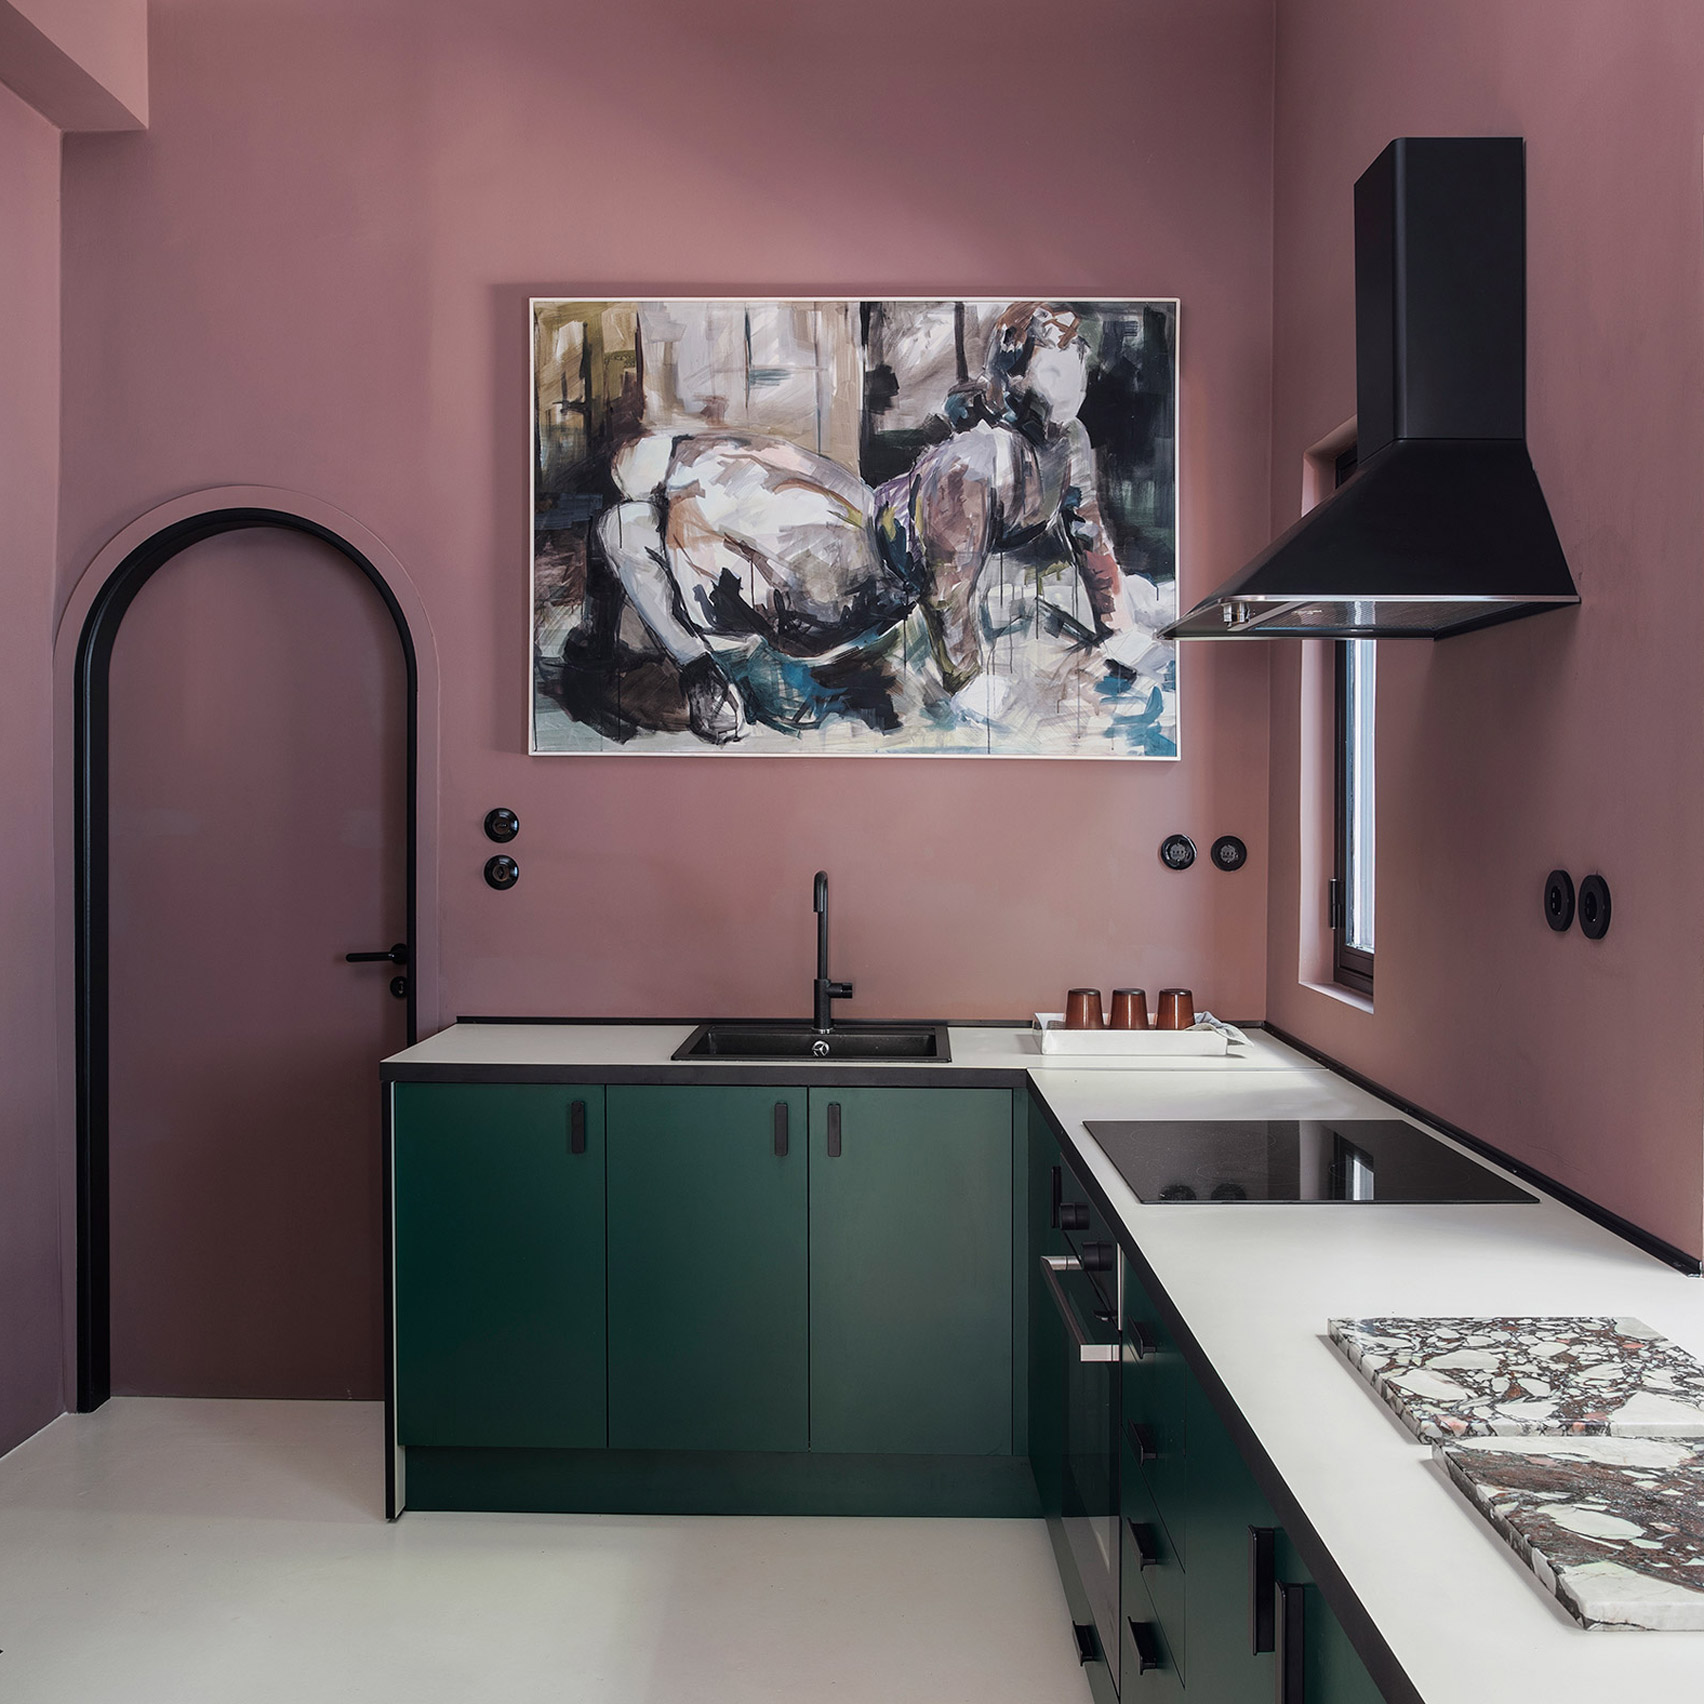 Plum-purple kitchen with green cabinetry